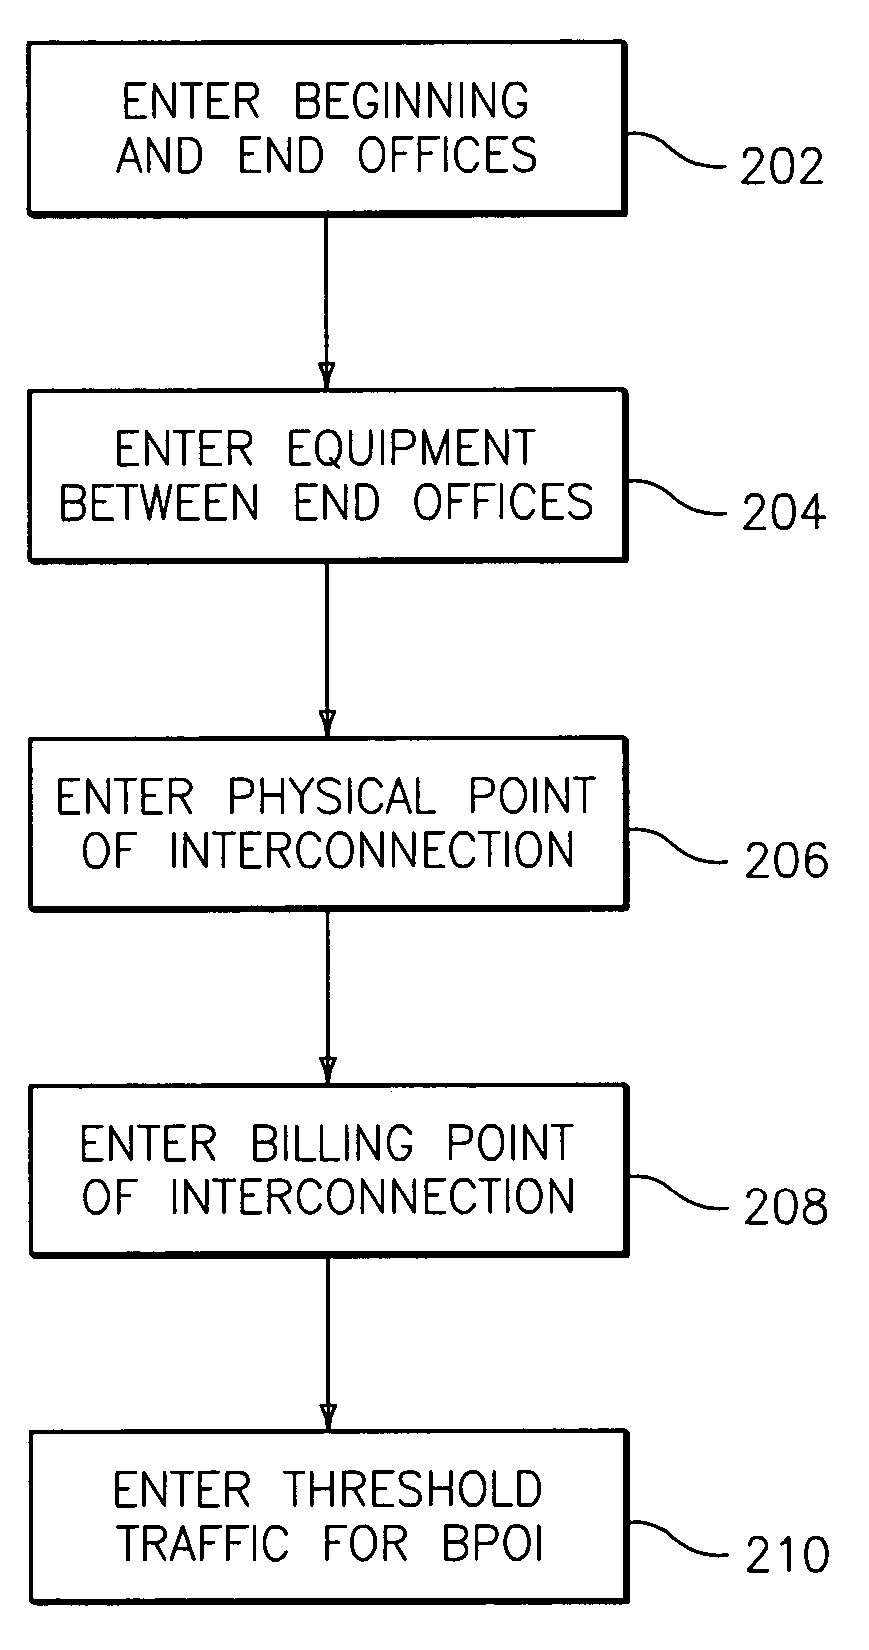 Methods, systems, and storage mediums for facilitating a billing point of interconnection in a telecommunications environment